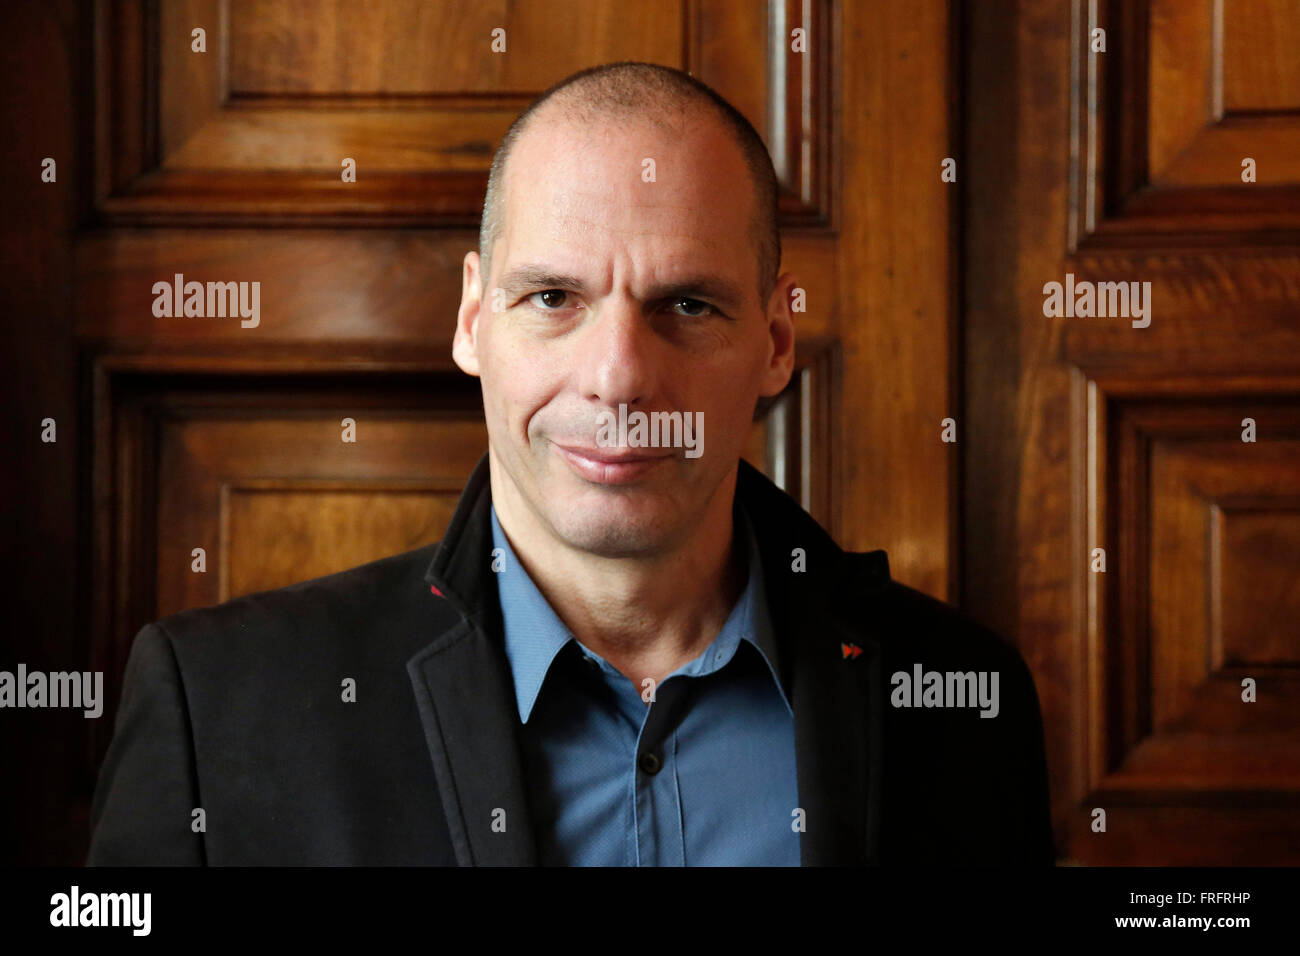 Rome, Italy. 22nd March, 2016. Besso Foundation. Press conference of the ex Minister of the Economy of Greece to present his political movement DIEM25. Credit:  Samantha Zucchi/Insidefoto/Alamy Live News Stock Photo